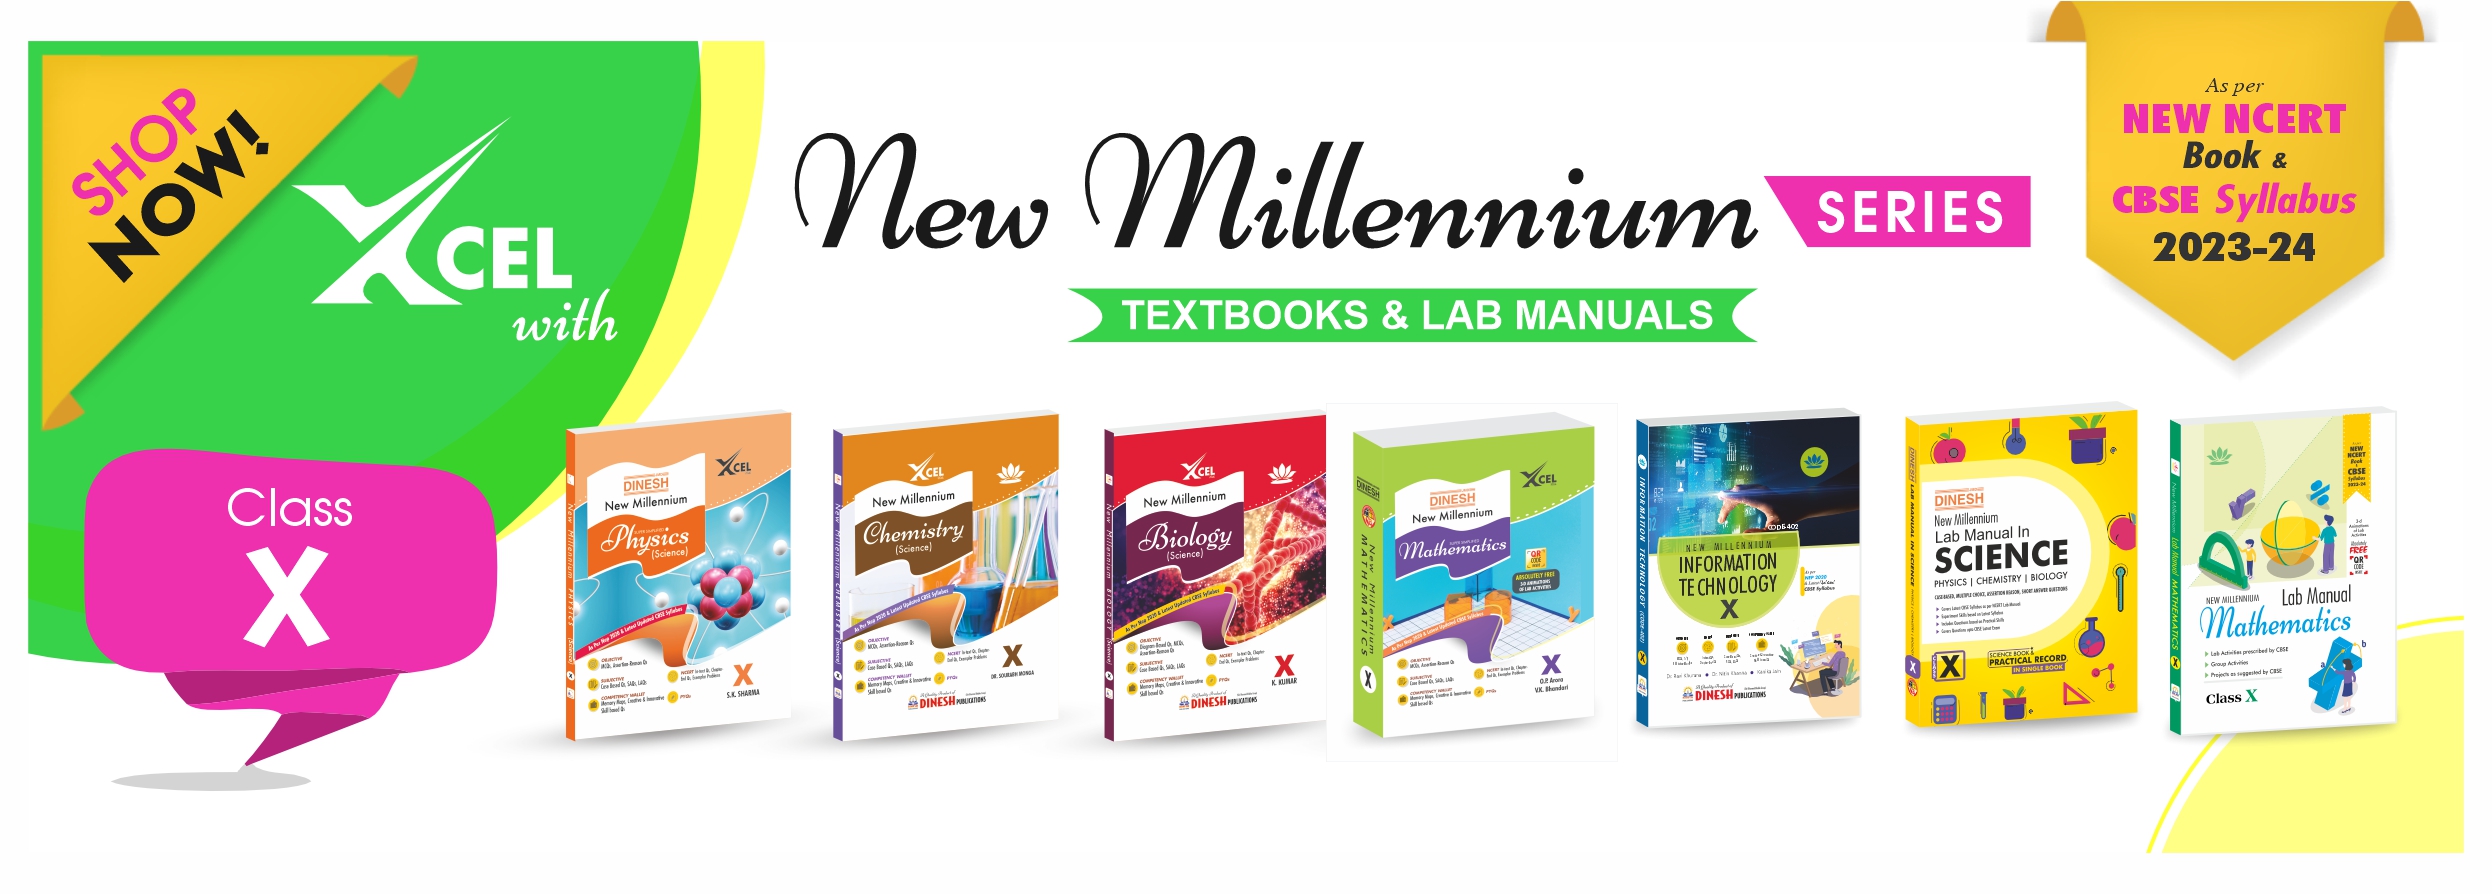 Textbooks and Labmanuals 2023-24